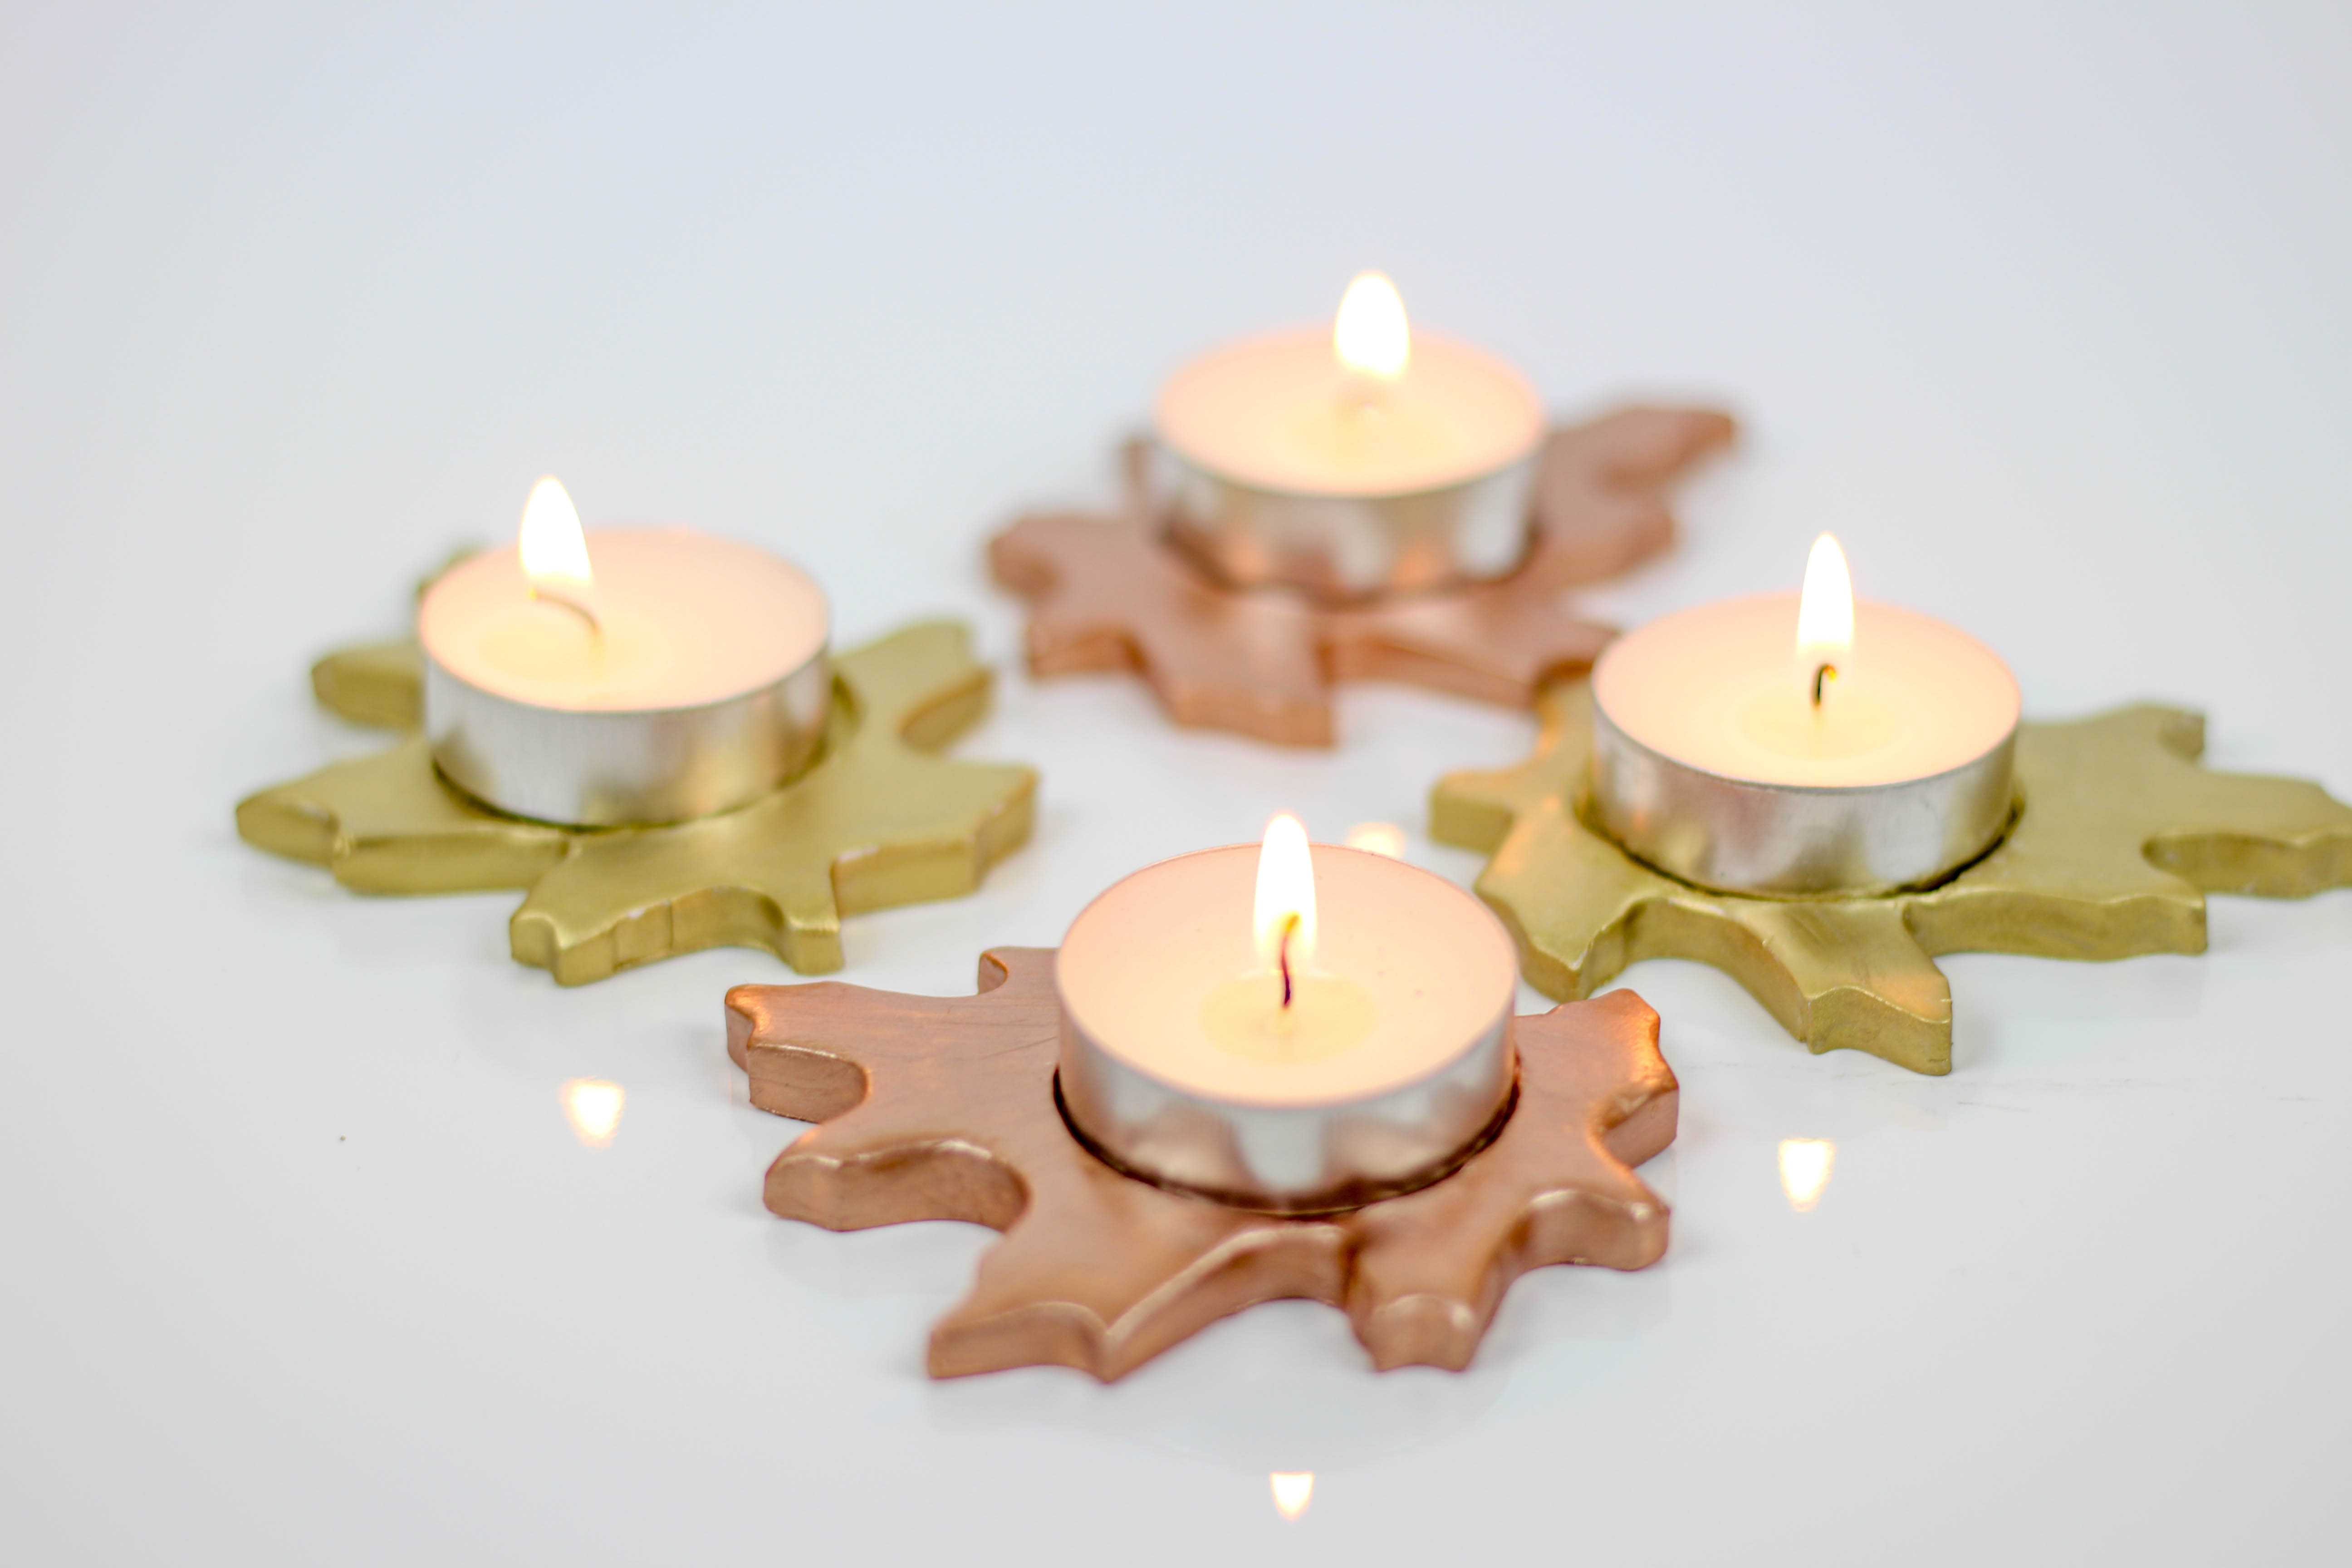 DIY Metallic Leaf Votive Candle Holders by Twinspiration